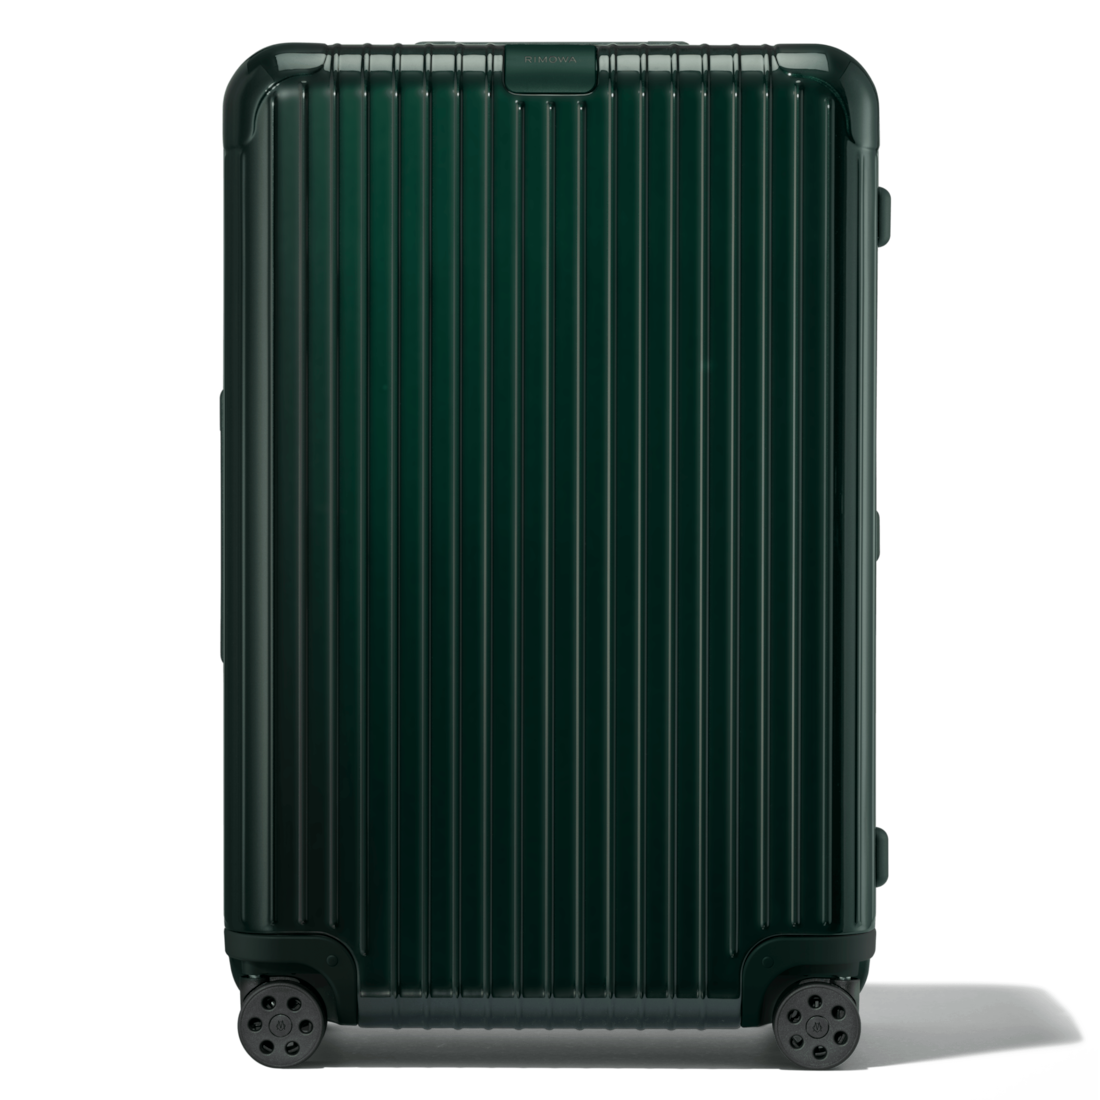 Rimowa to Regain China Distribution Rights, and More